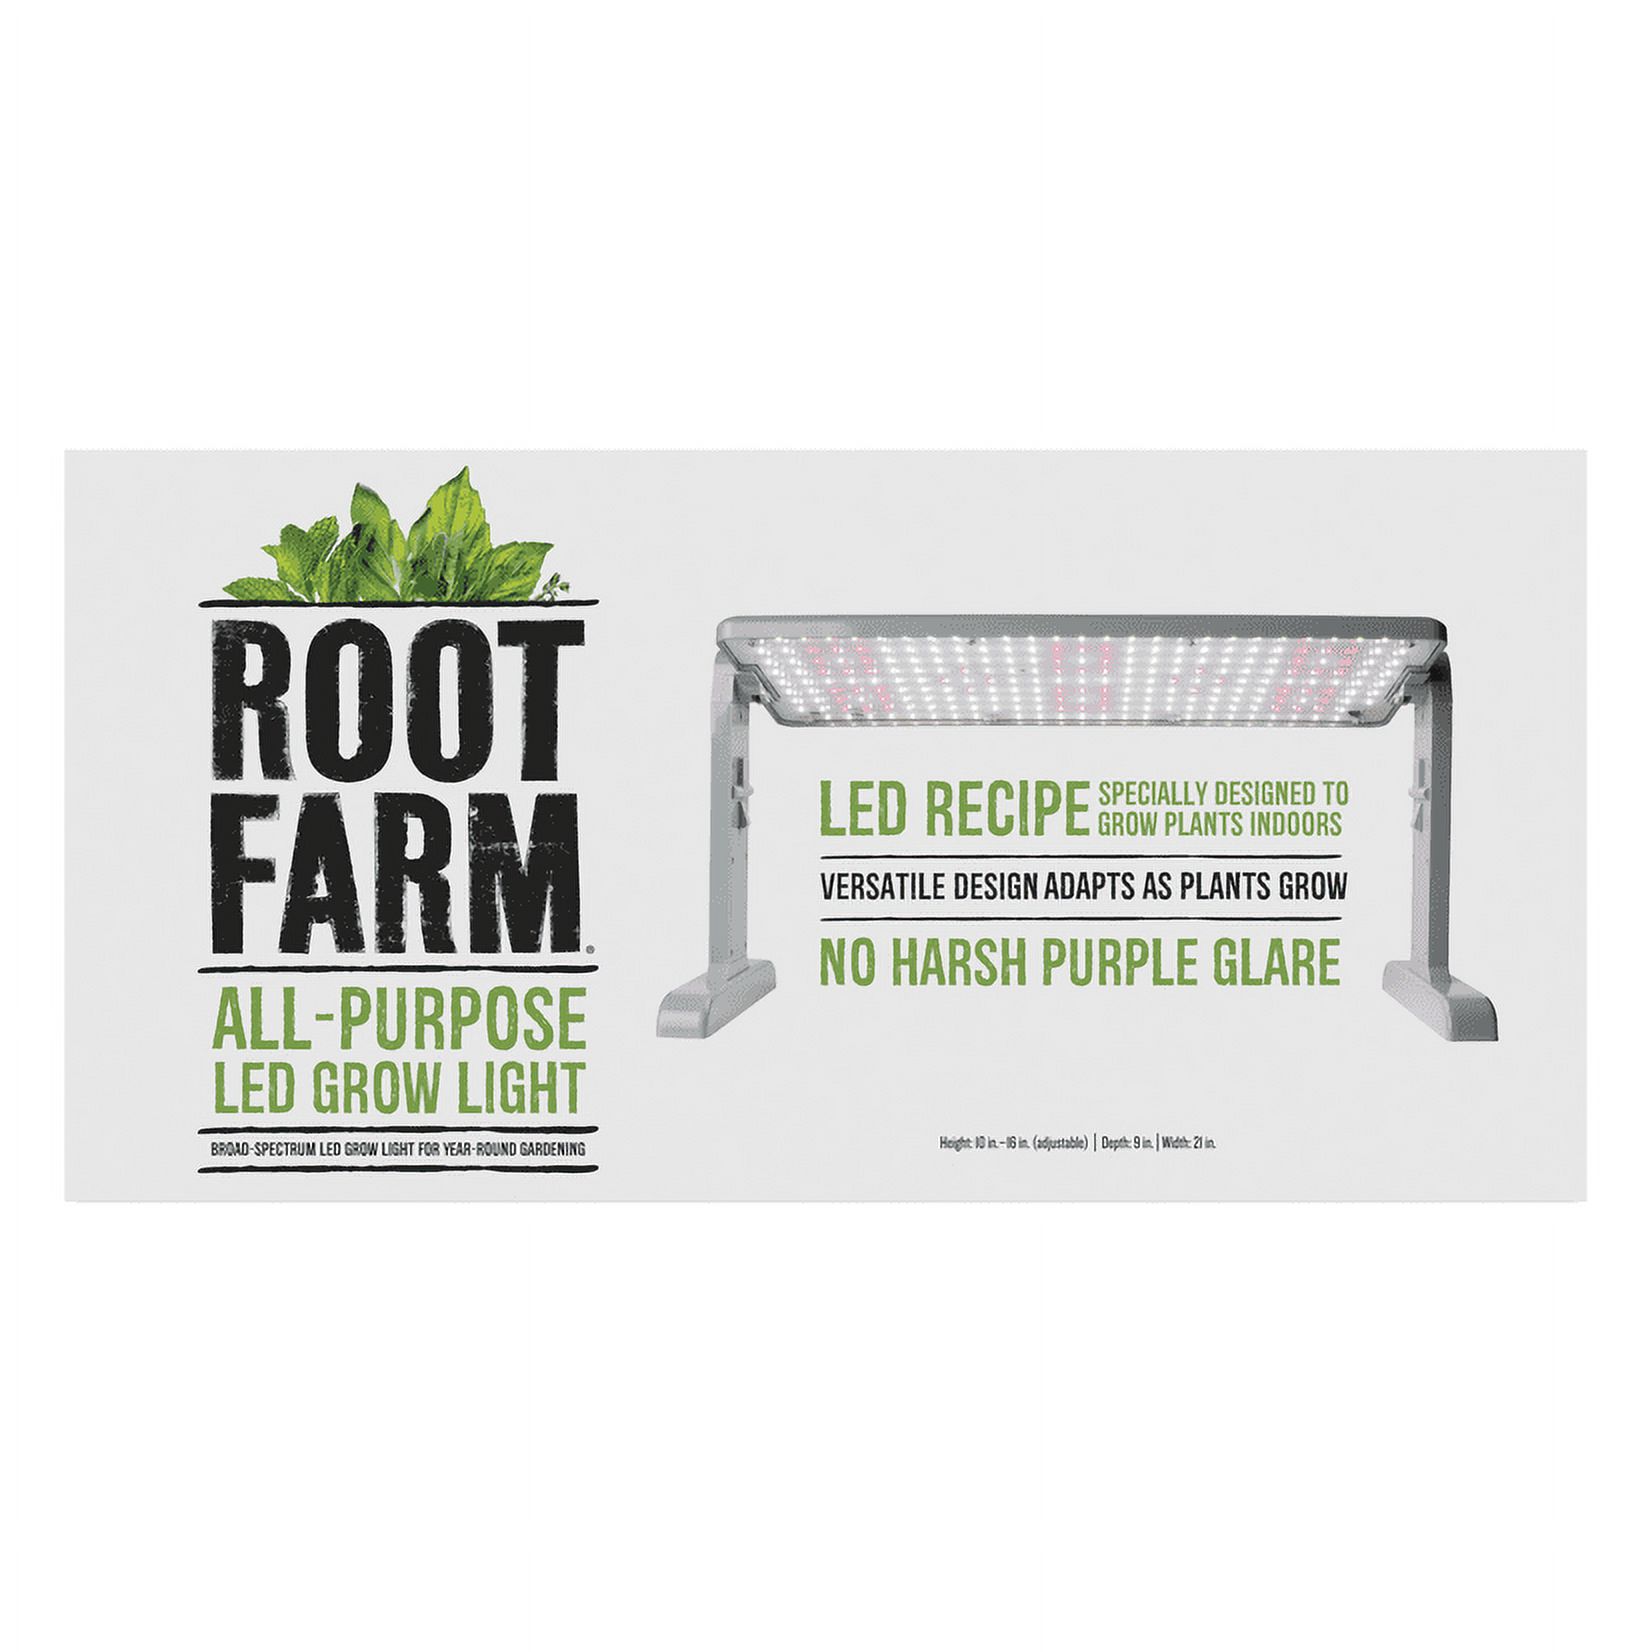 Root Farm All-Purpose LED Grow Light, 45W - Broad Spectrum Grow Lamp, for Indoor Hydroponic Plants, Energy Efficient - image 1 of 11